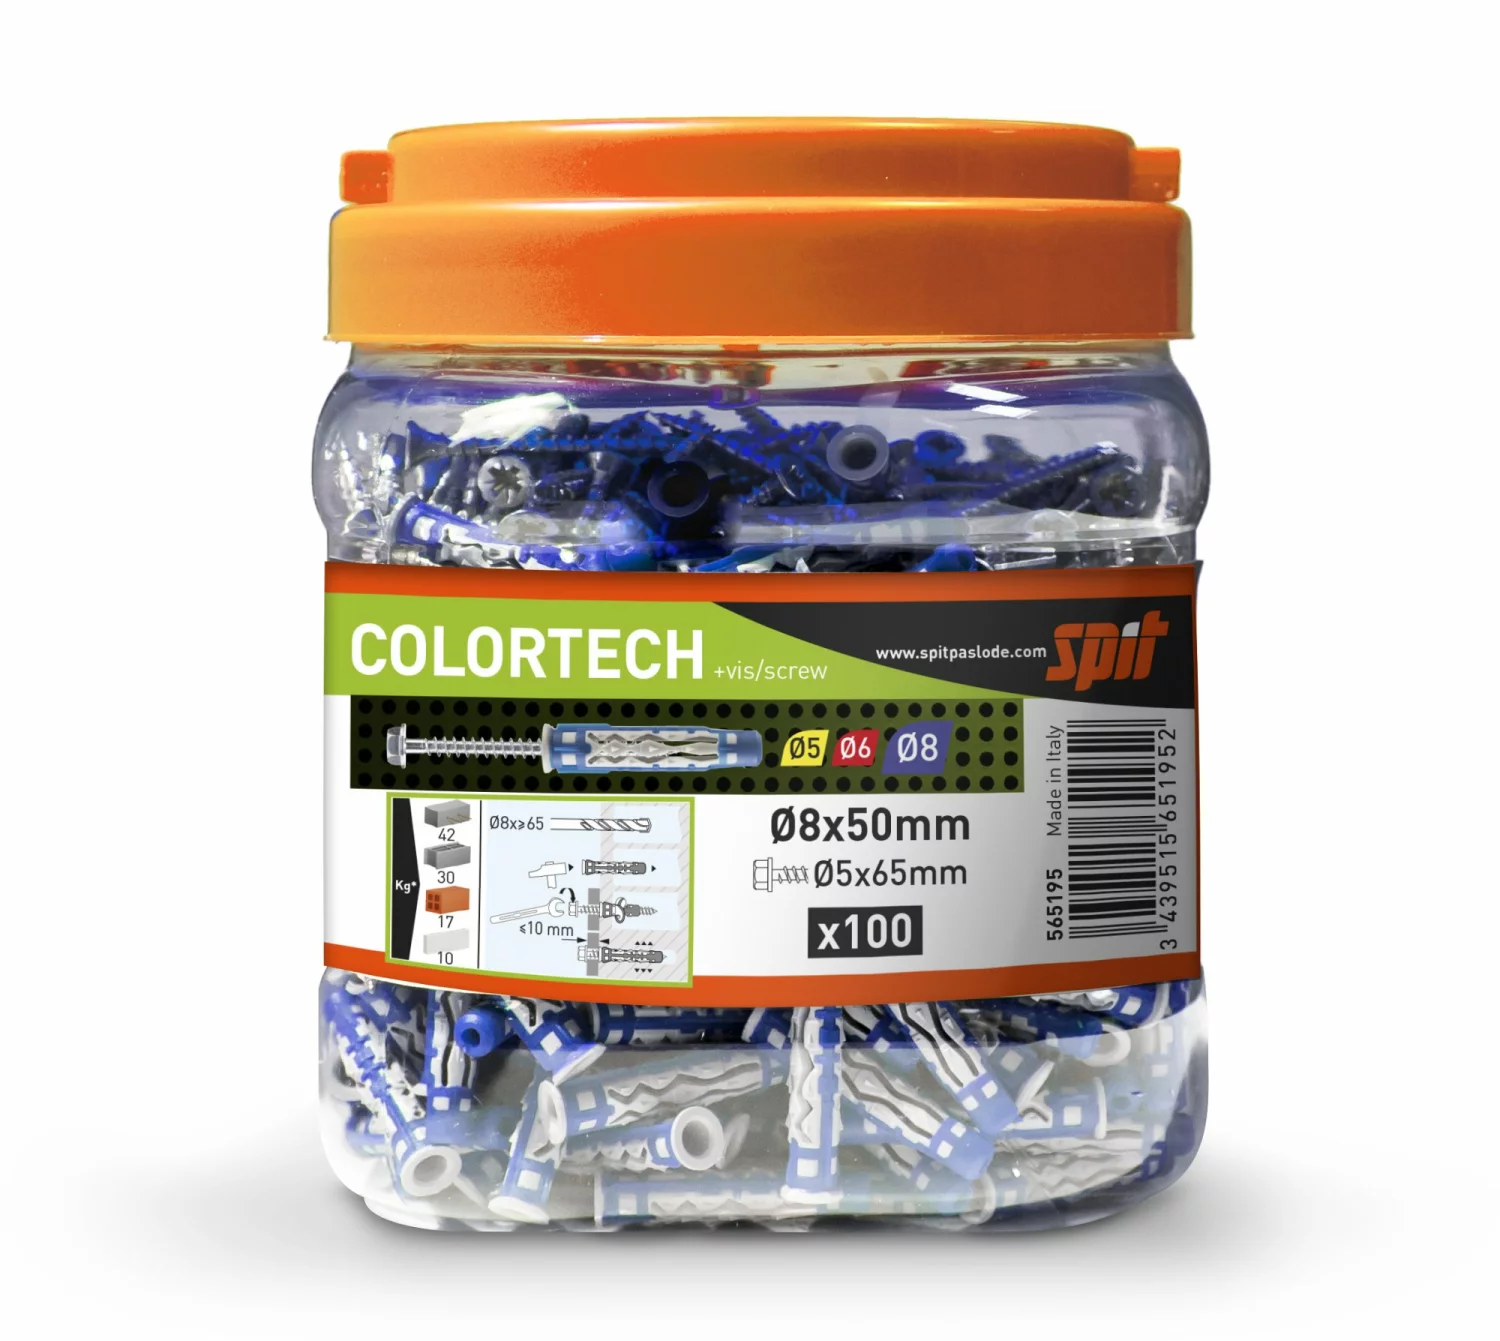 Spit 565195 Colortech Uni Plug 8X50 Met Schroef In Can (100St)-image